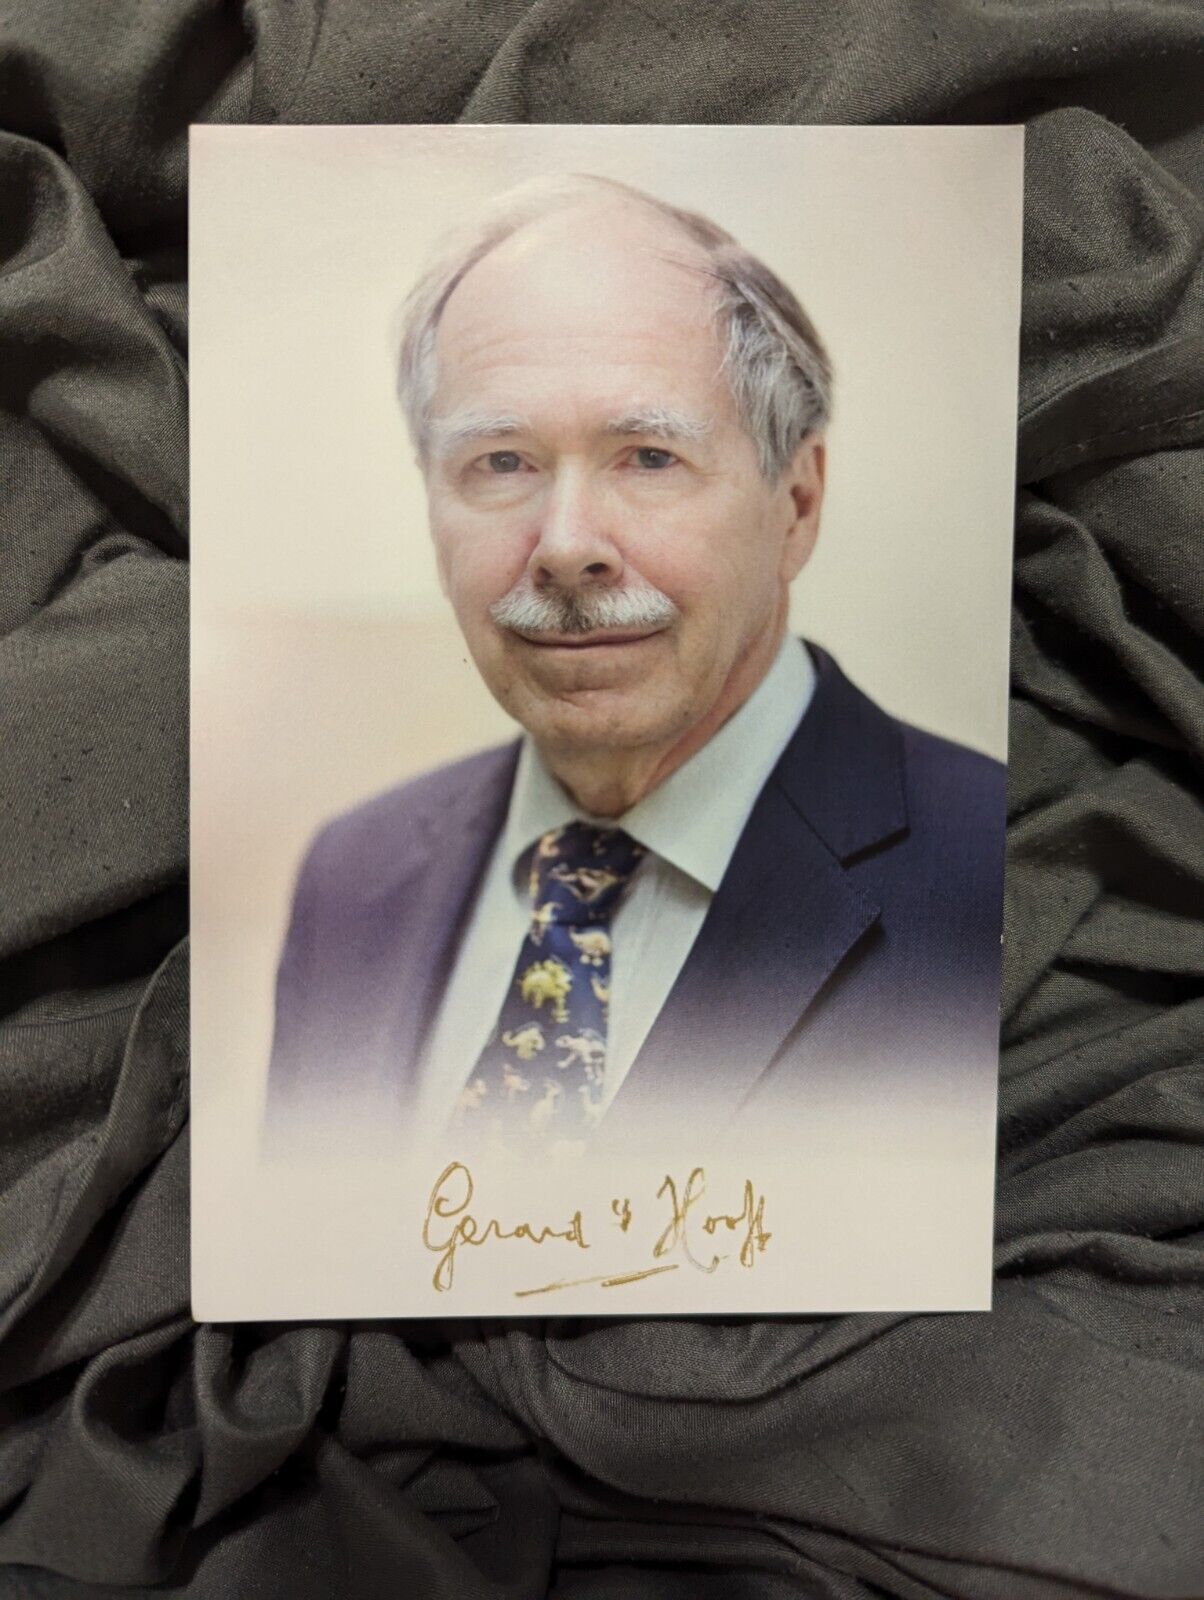 Gerard 't Hooft Dutch theoretical physicist Signed Autographed Photo